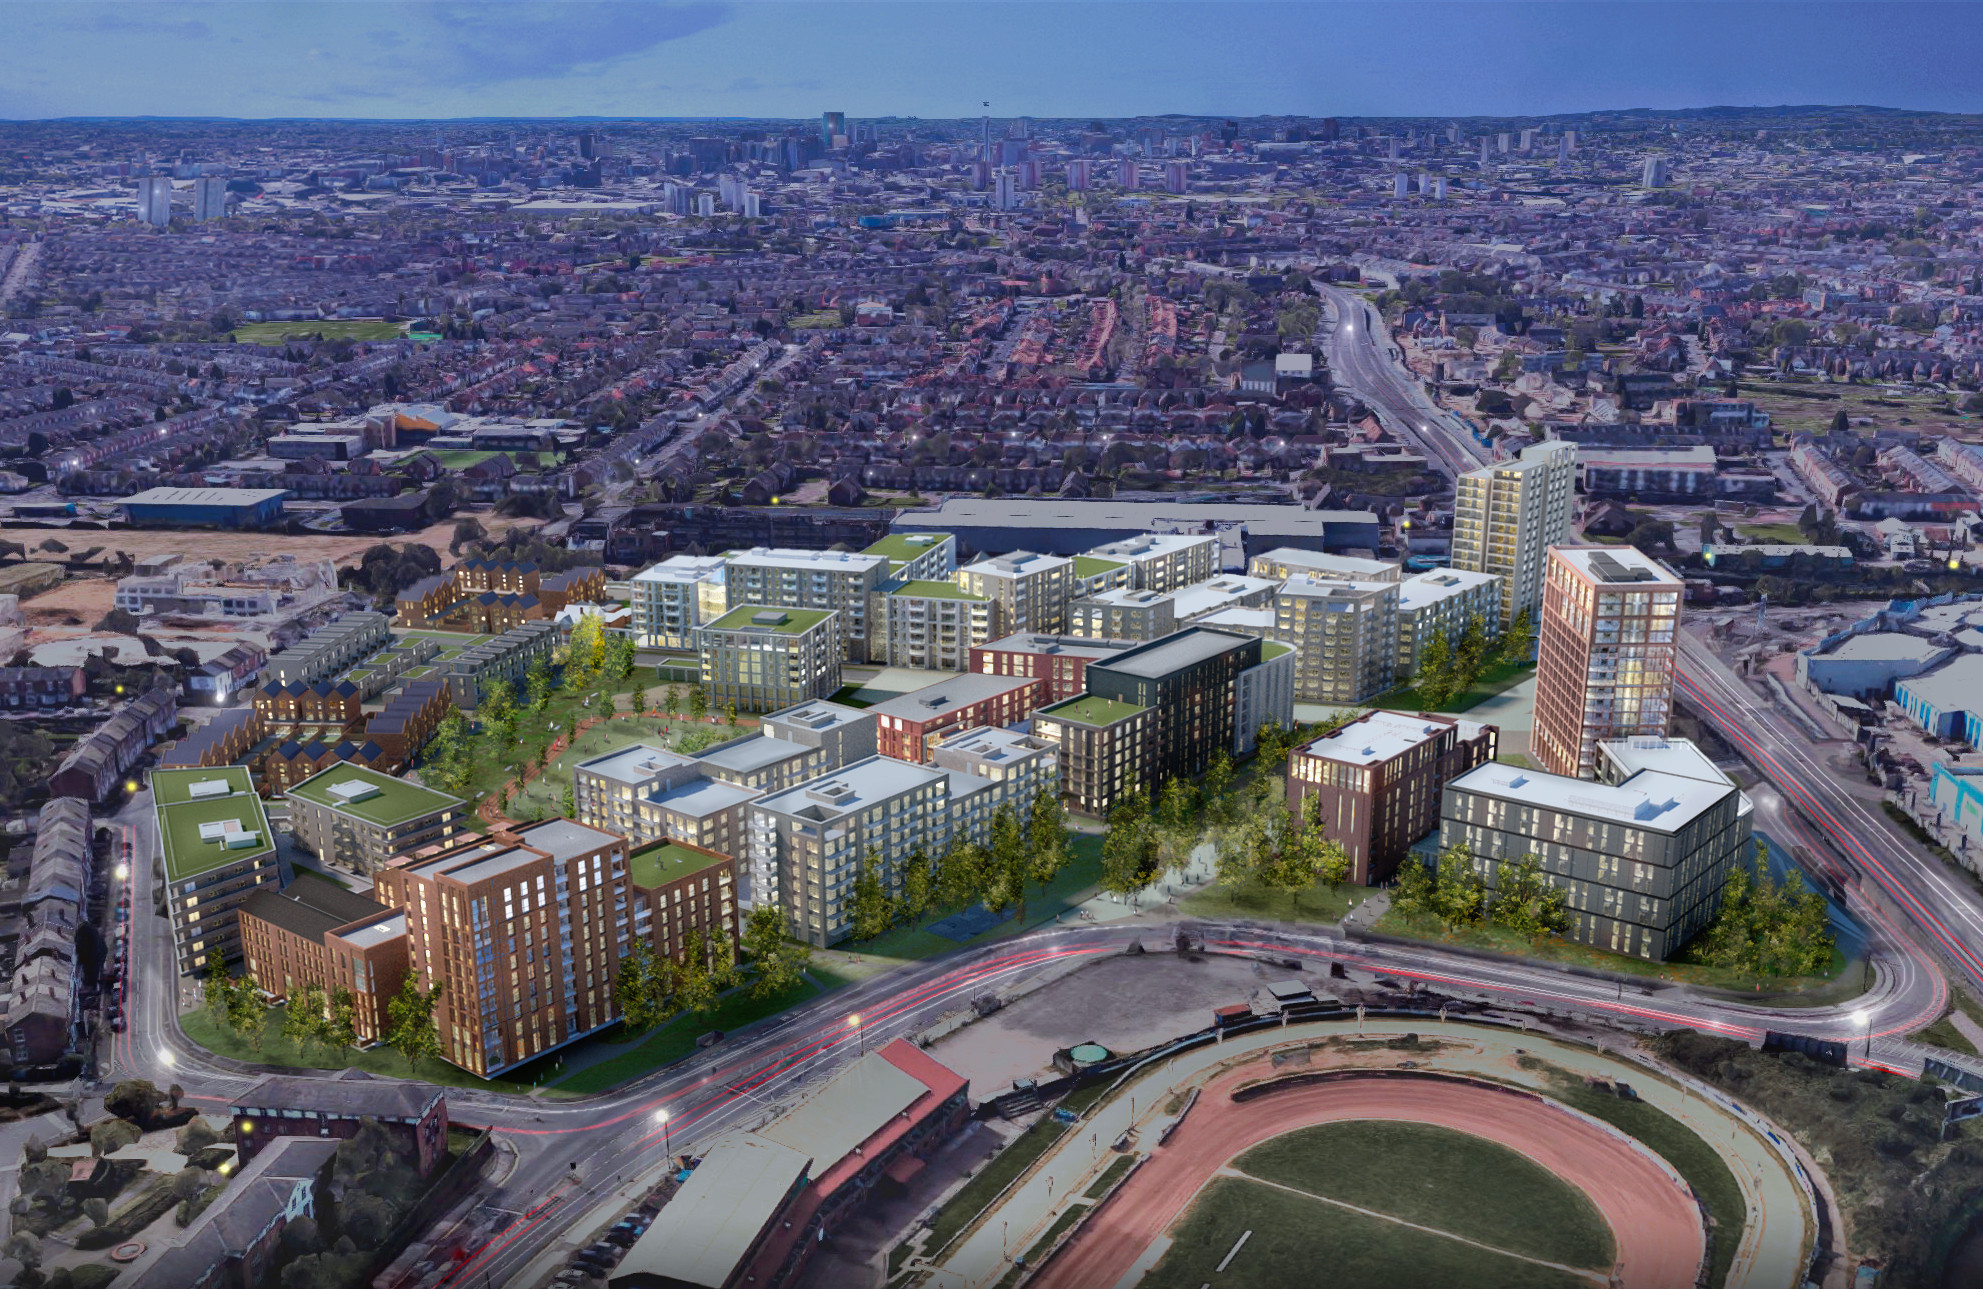 Funding for the Athletes' Village being built for the 2022 Commonwealth Games is set to be discussed by Birmingham City Council ©Birmingham 2022